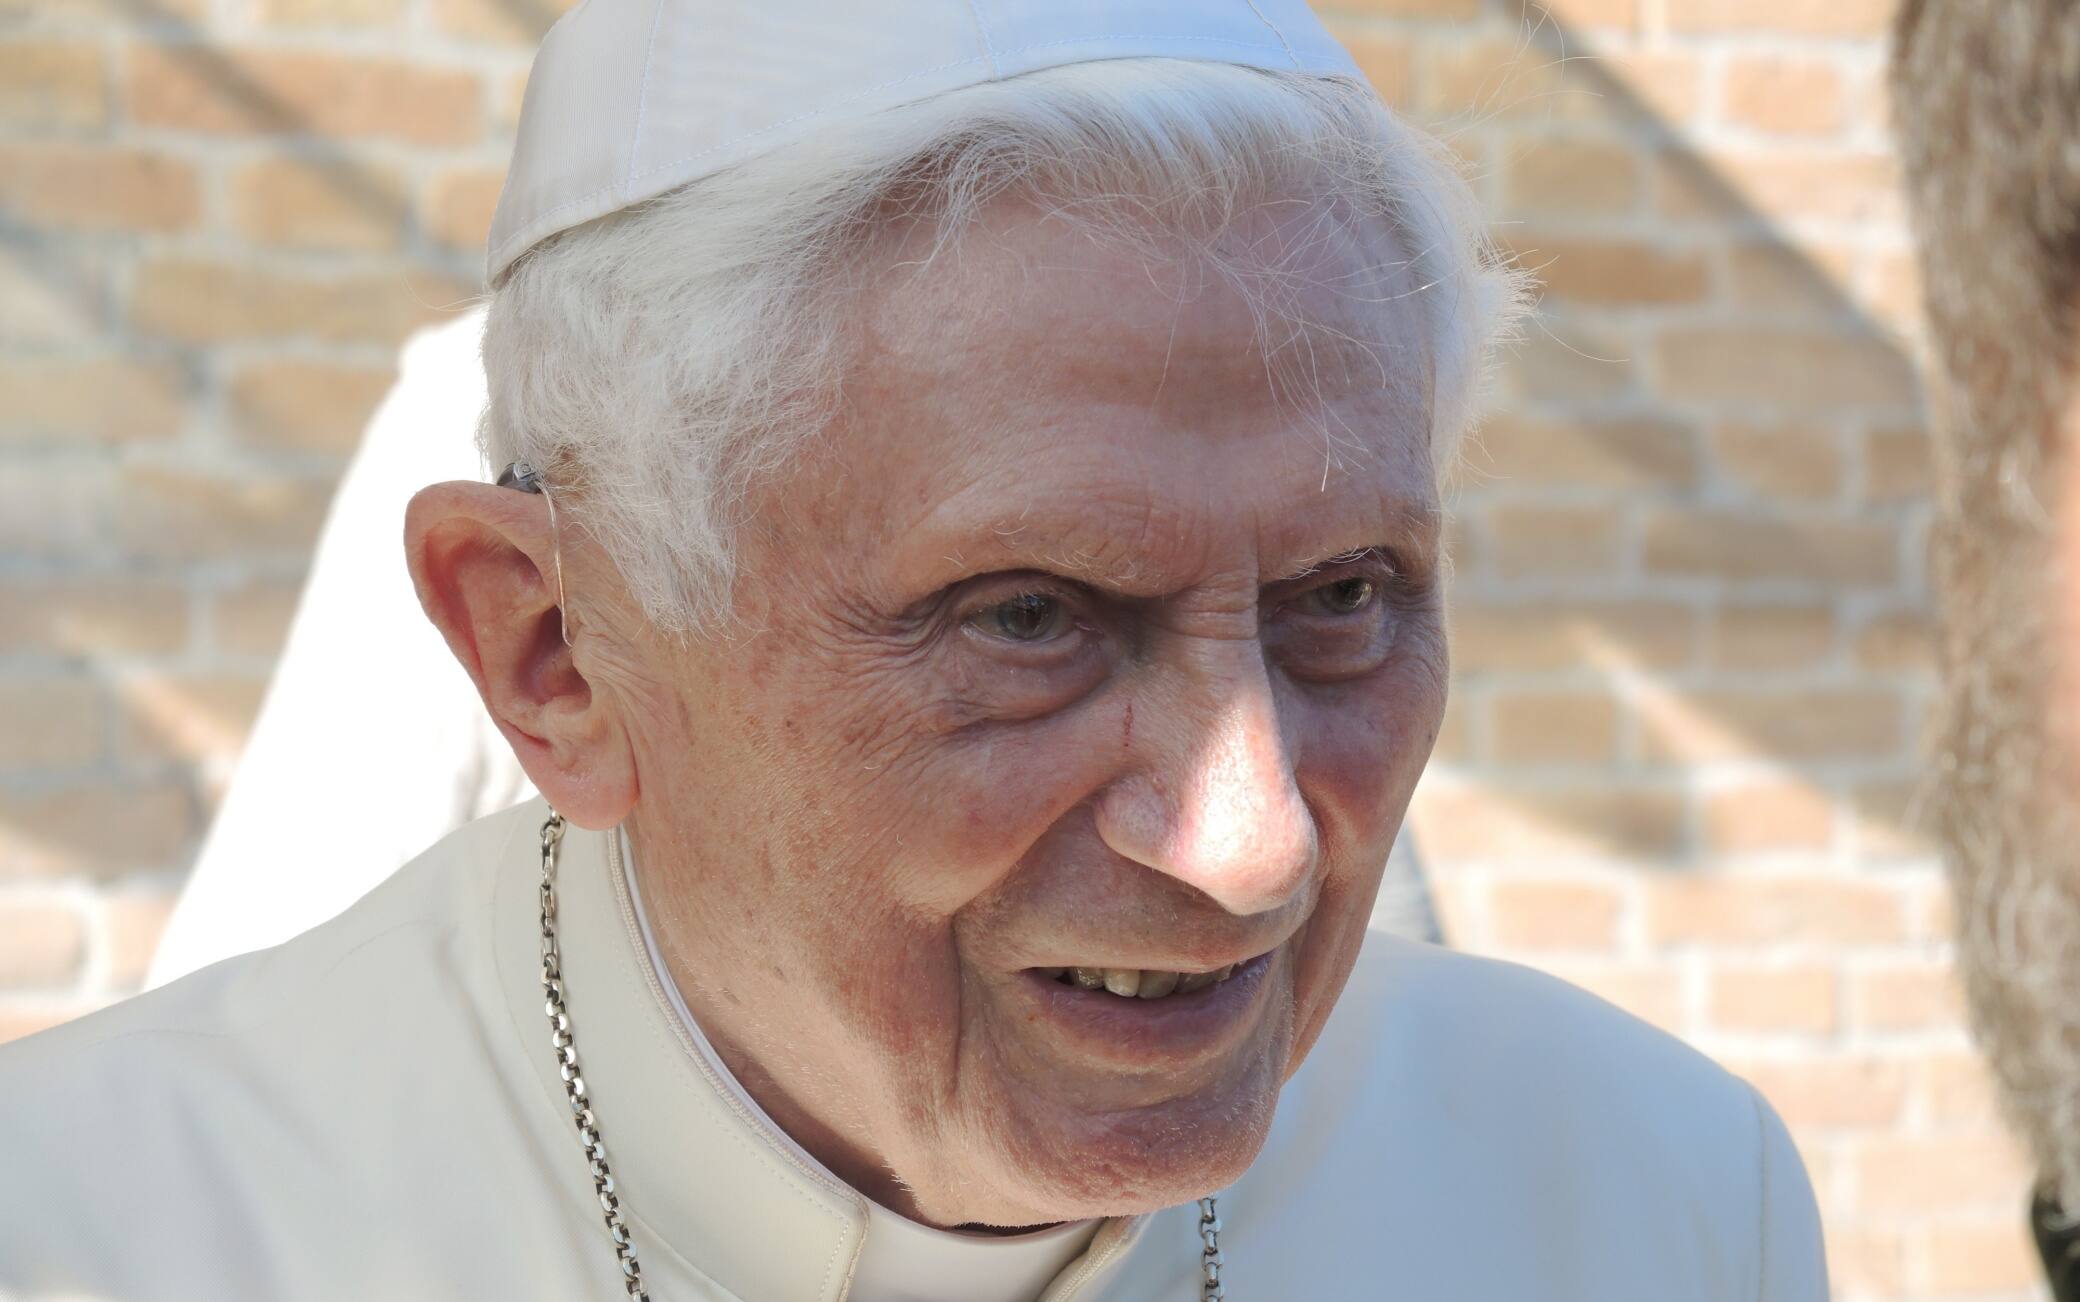 Retired Pope Benedict XVI in the Vatican Garden in Vatican City, 17 April 2017. Benedict is celebrating his 90th birthday and received visitors from Bavaria, the German state from which he hails. His actual birthday was celebrated with a small circle of intimates including his older brother Georg, his private secreatary and his housekeeper. Photo: Lena Klimkeit/dpa